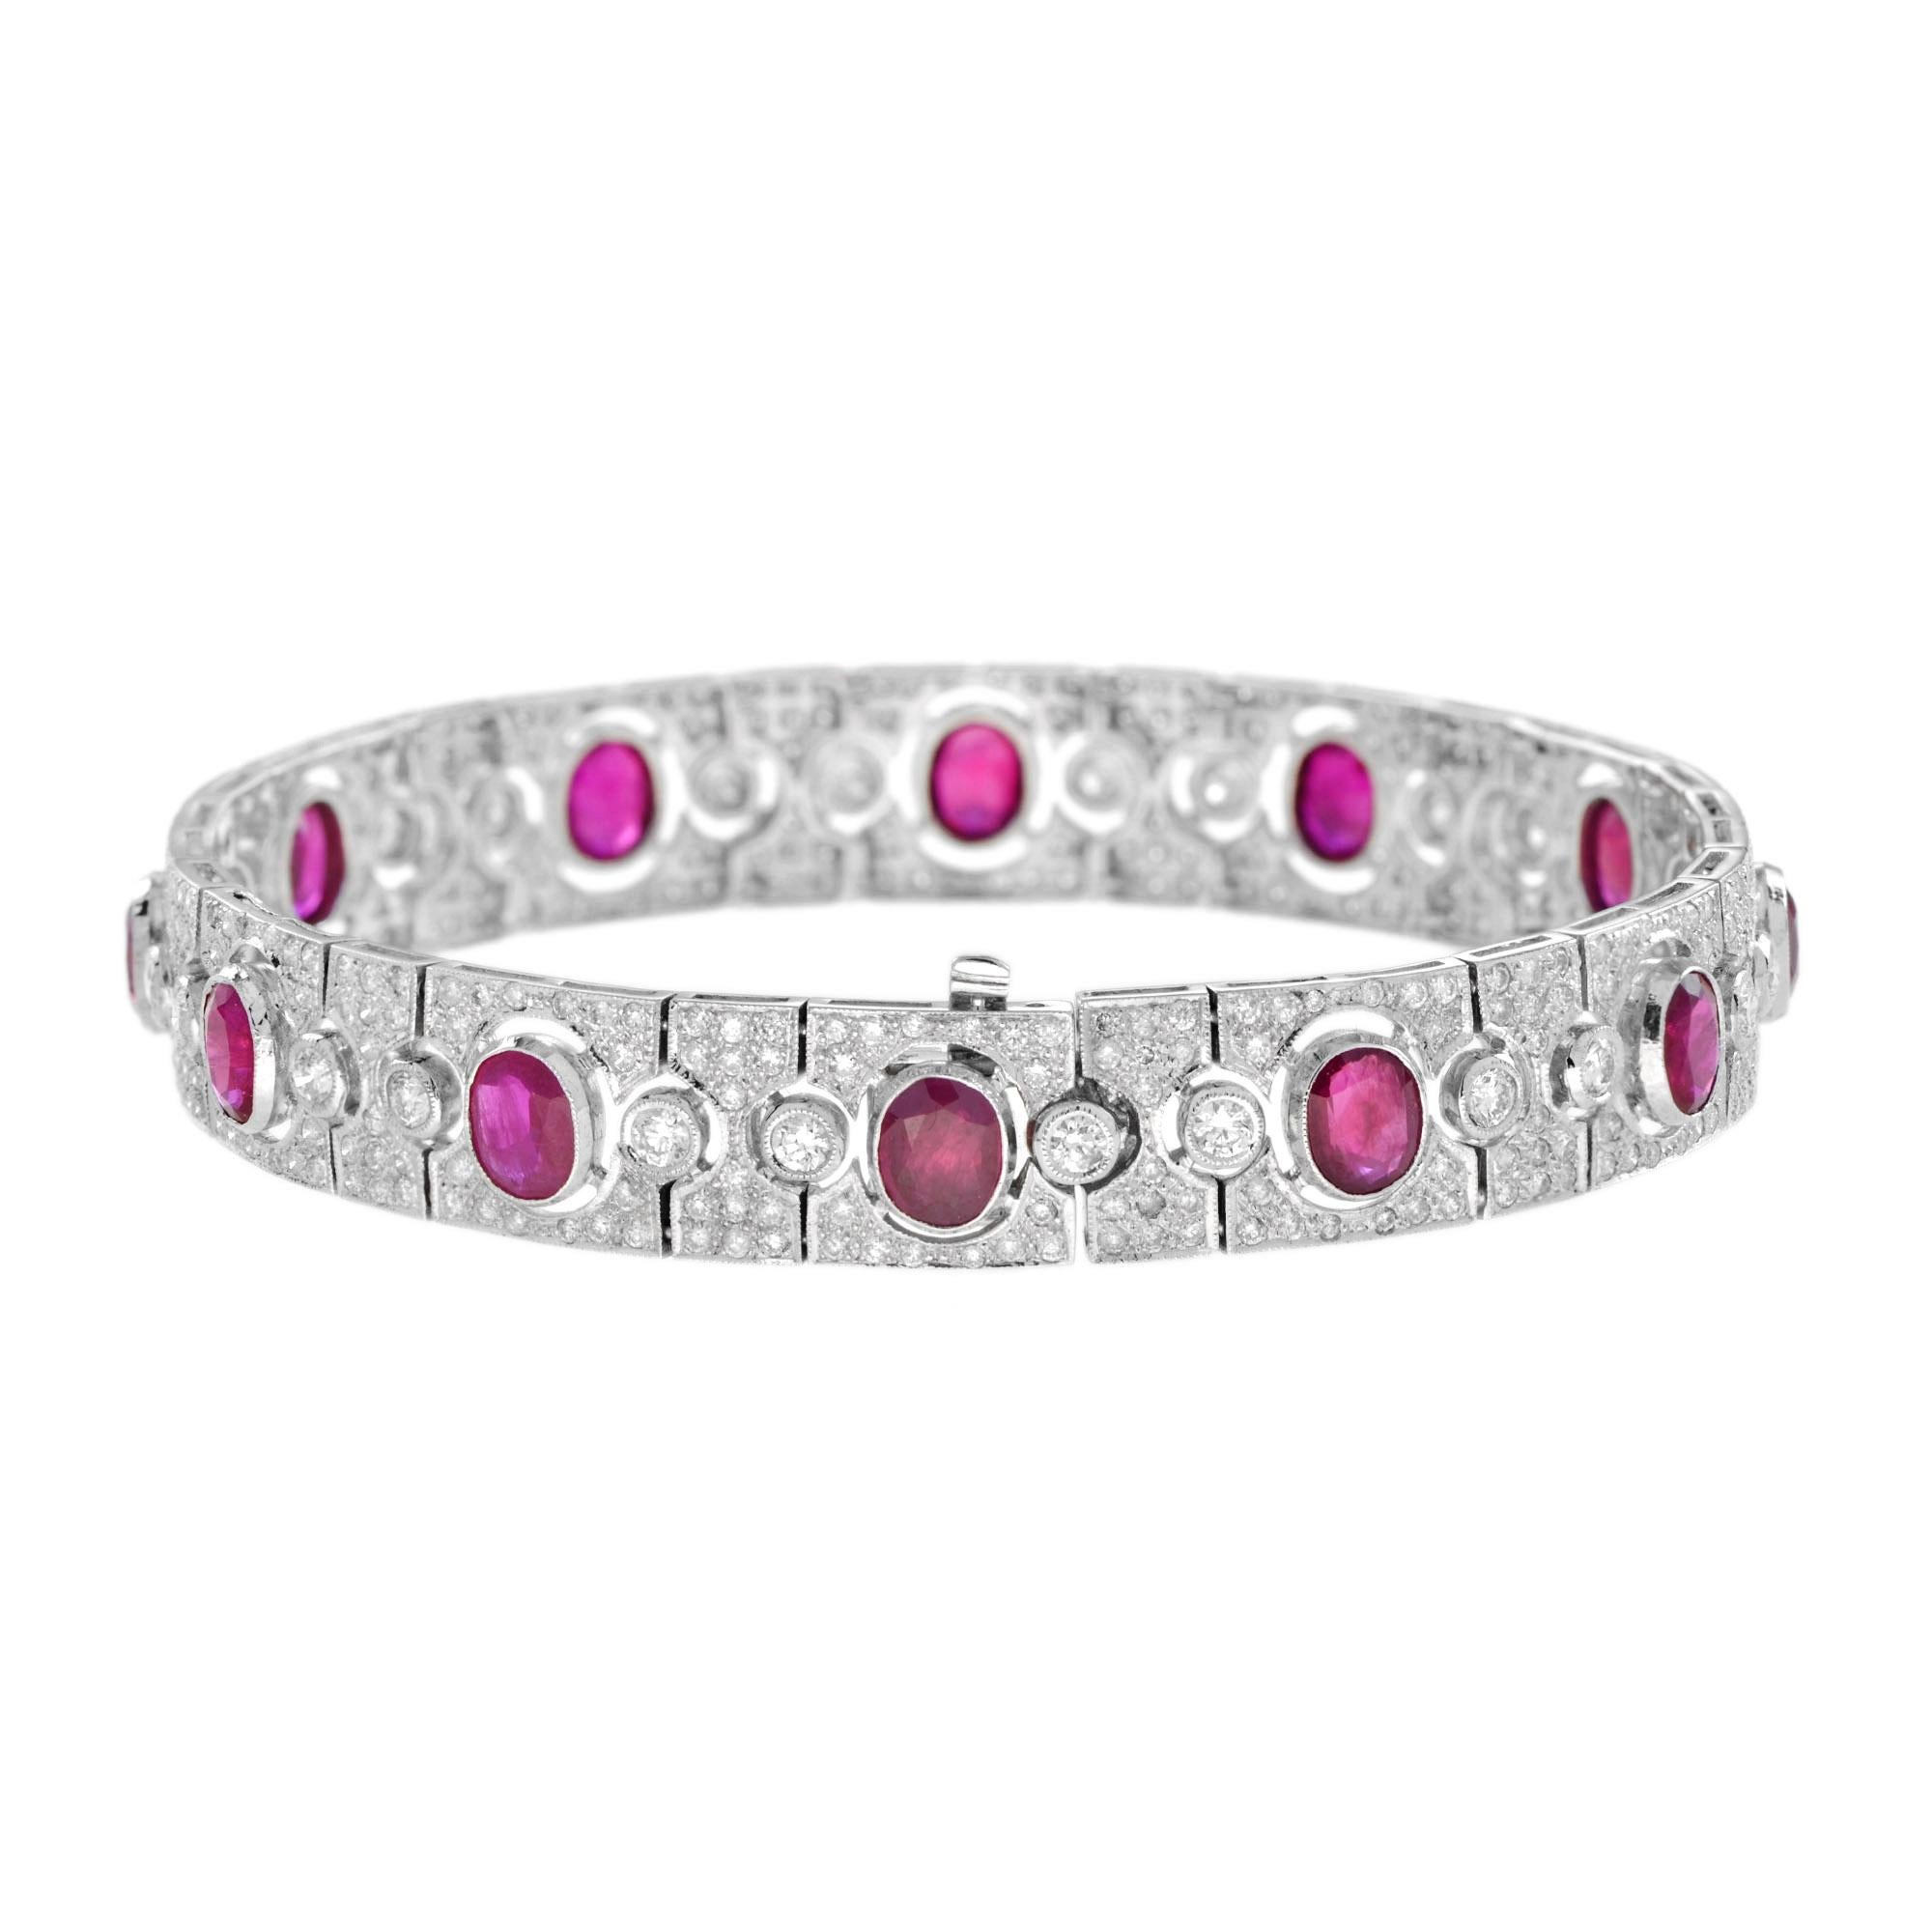 Oval Cut Art Deco Style 8.87 Ct. Oval Ruby and Diamond Bracelet in 18K White Gold For Sale